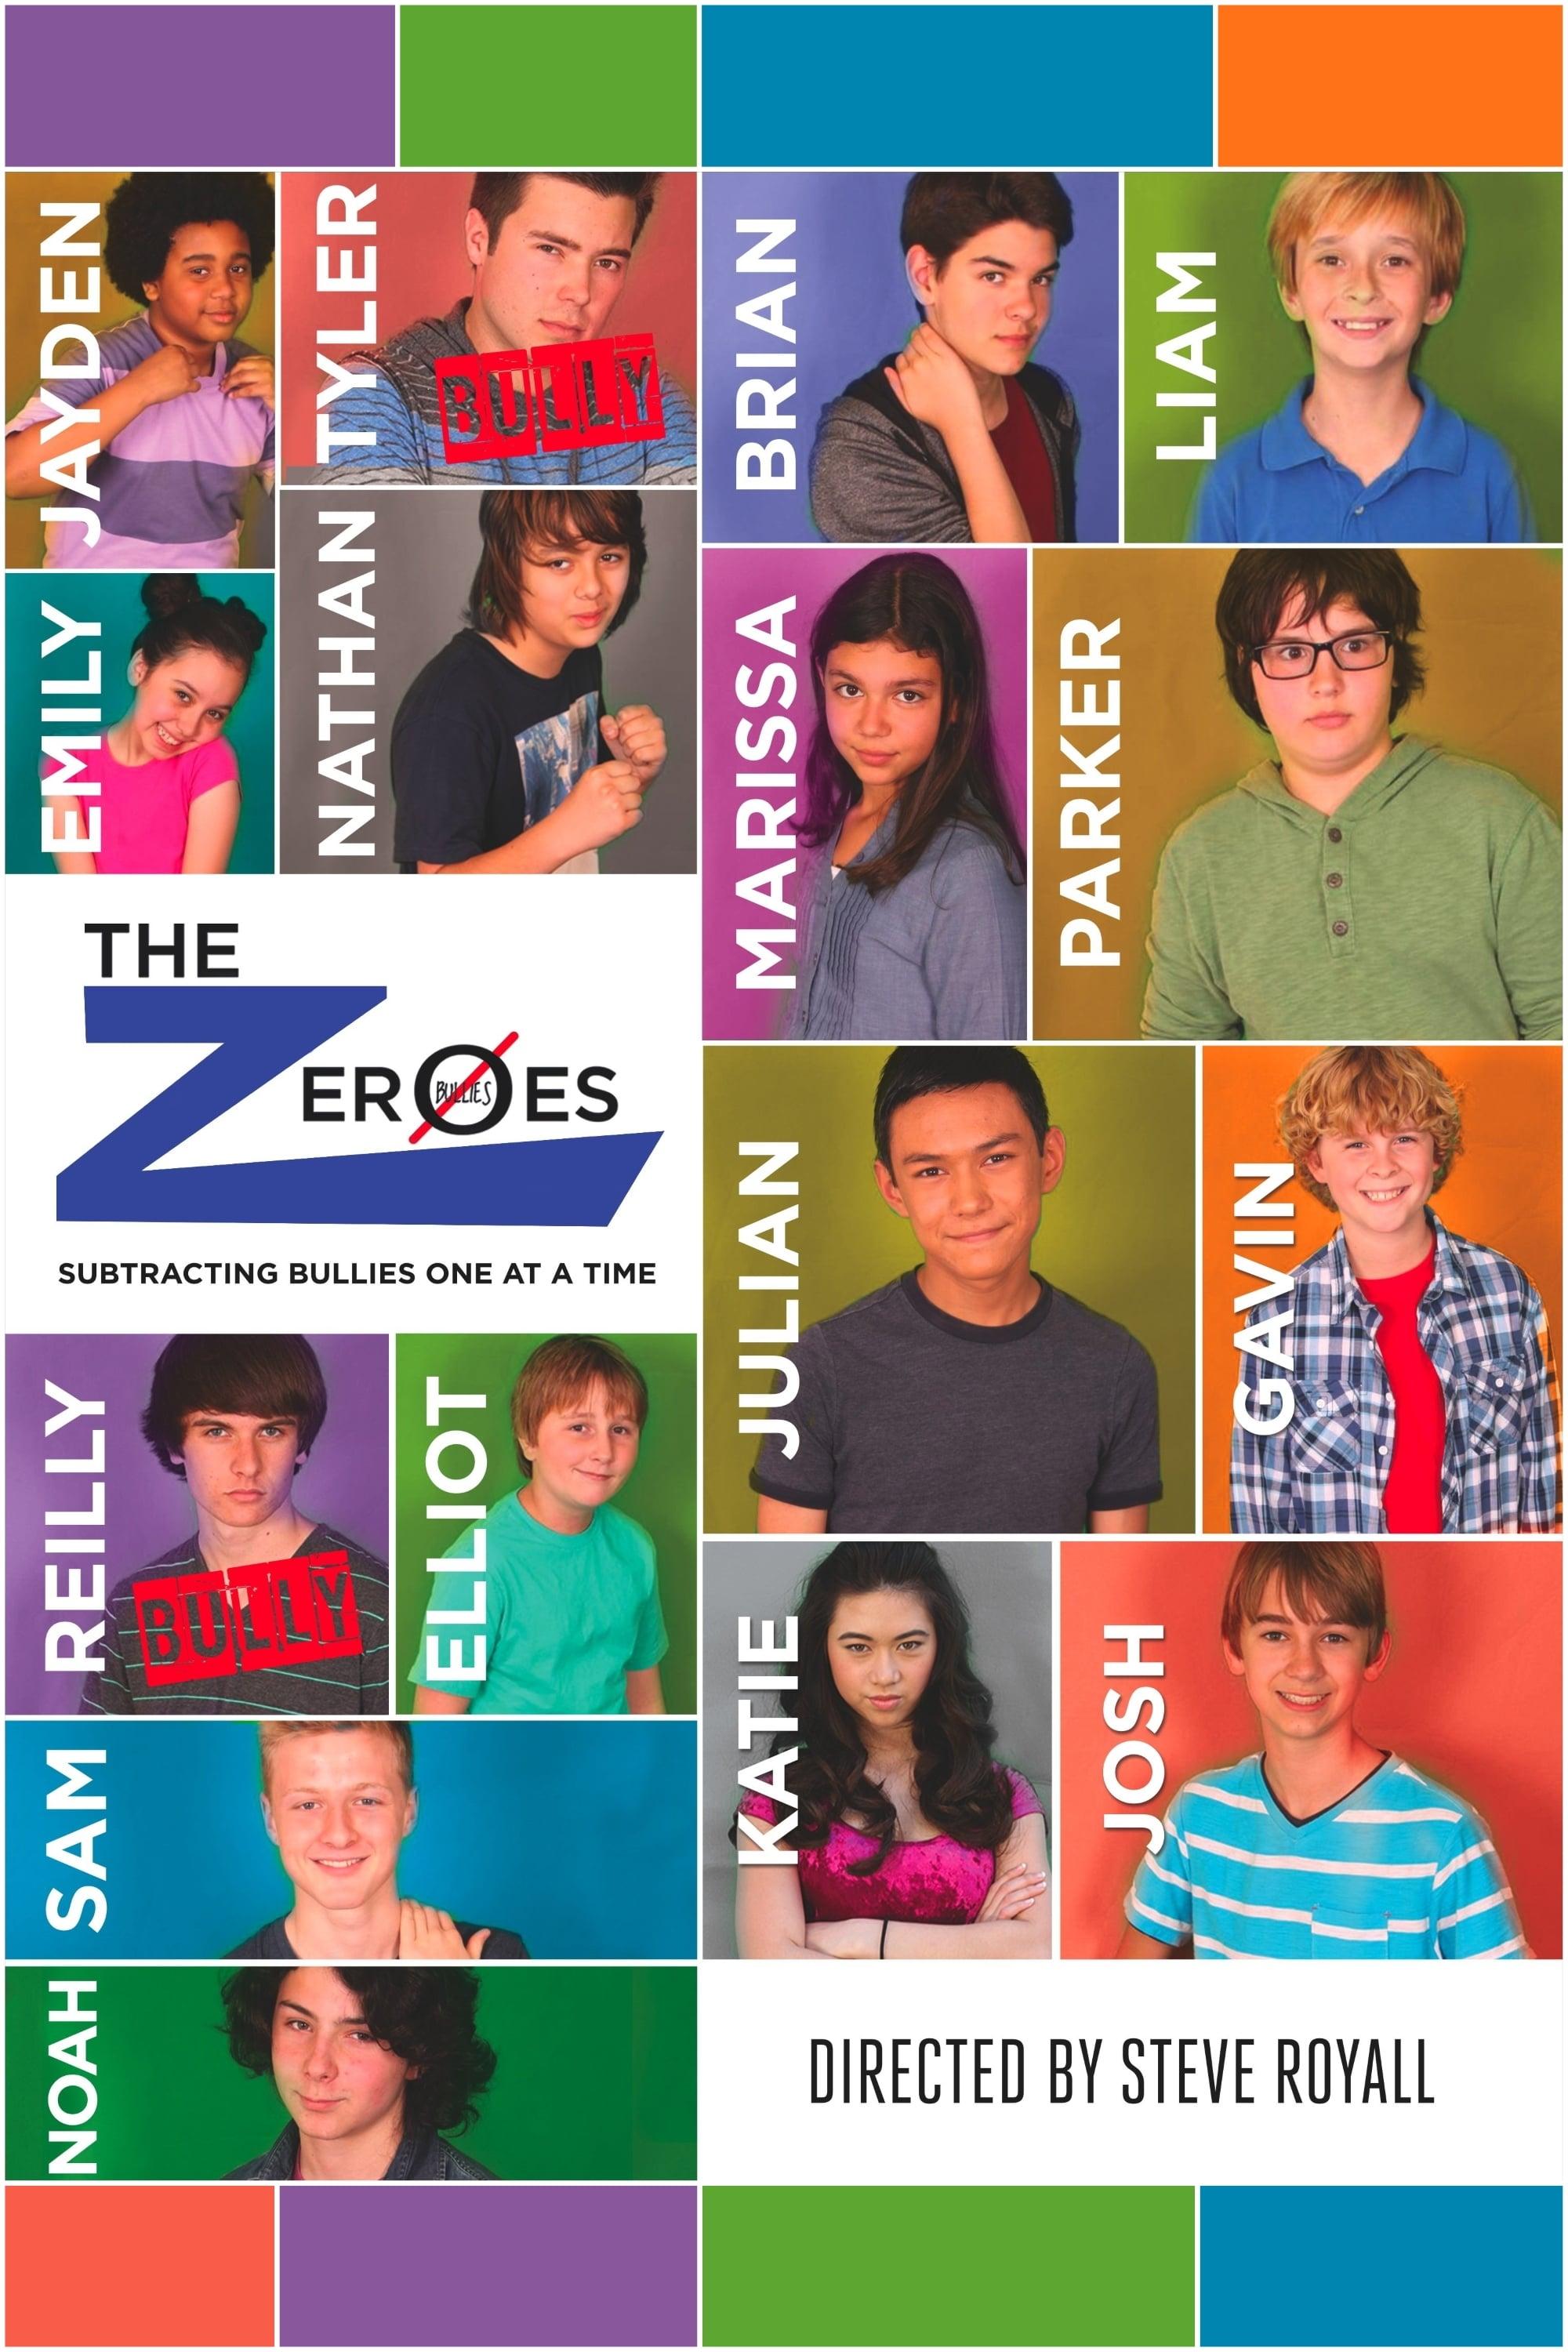 The Zeroes poster